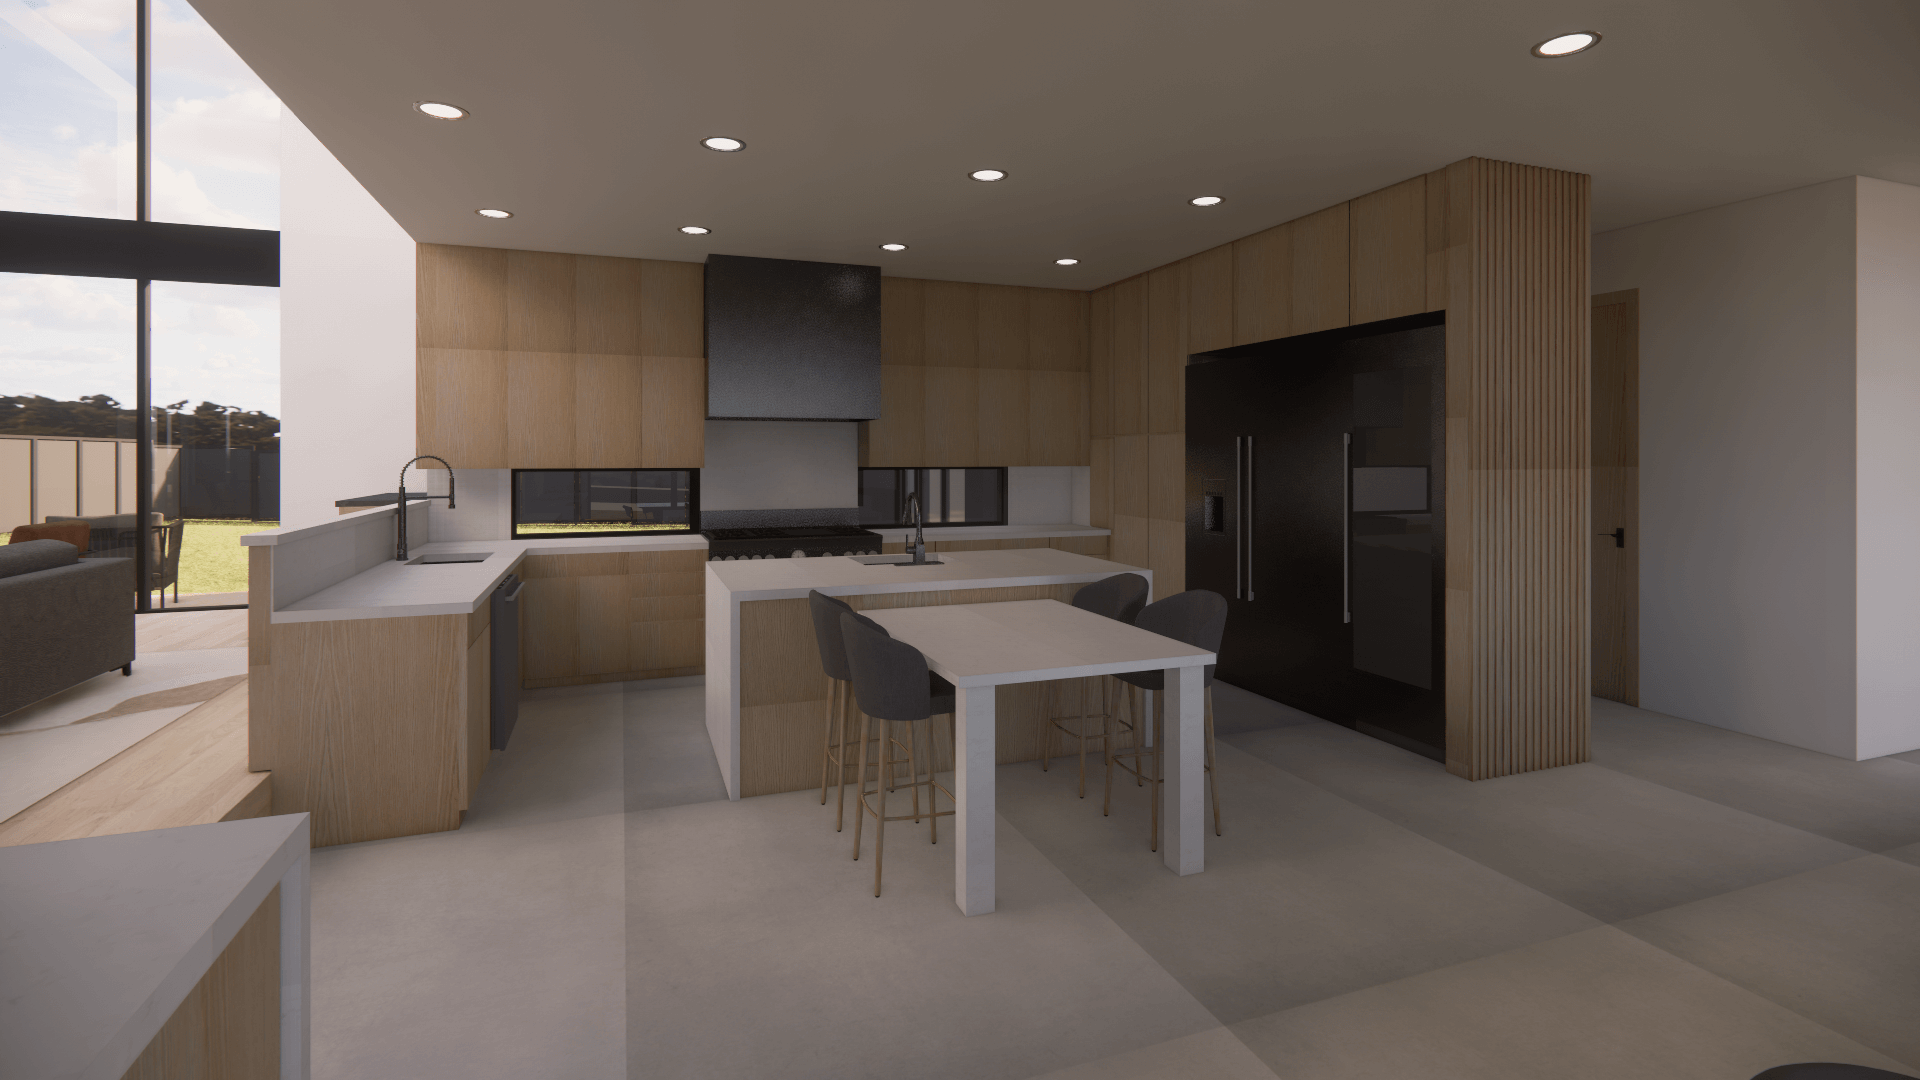 KITCHEN WITH CAN LIGHTS.png